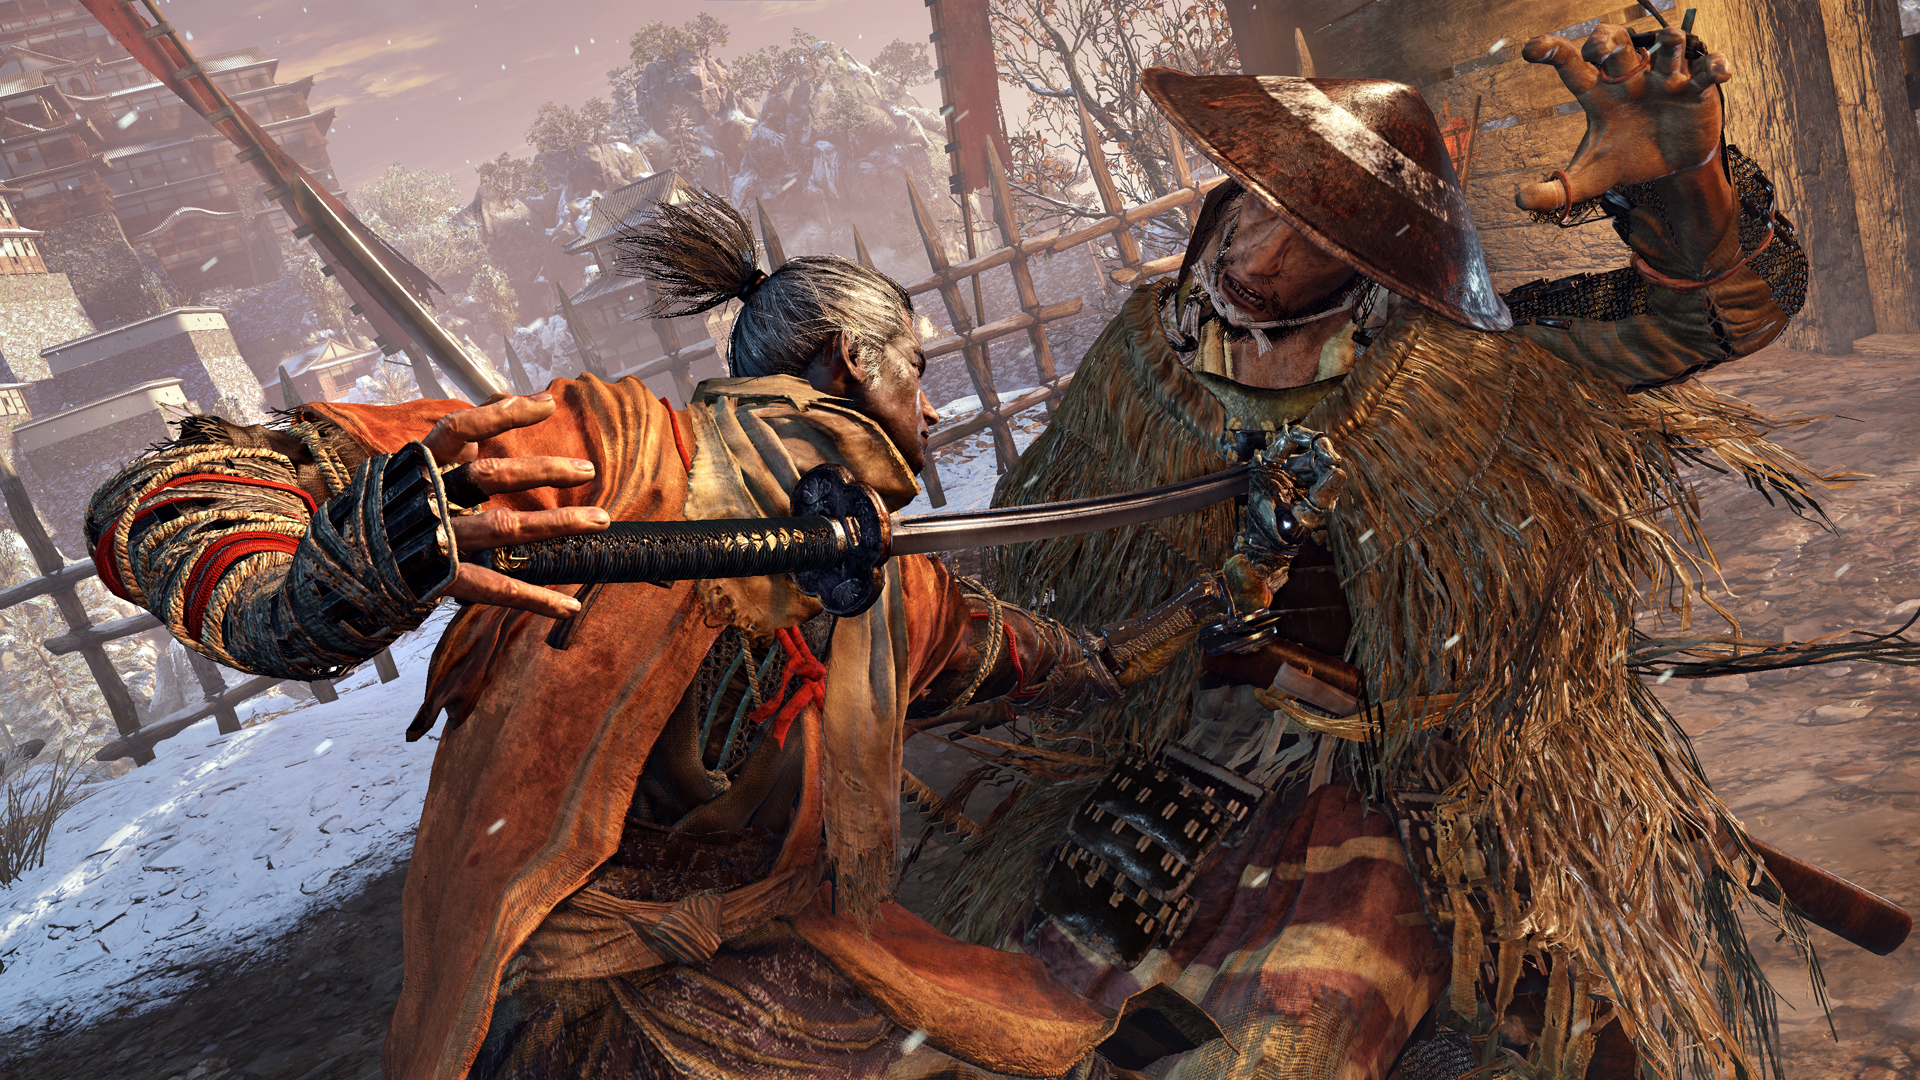 Sekiro Shadows Die Twice Sekiro Shadows Die Twice From Software Video Games 1920x1080